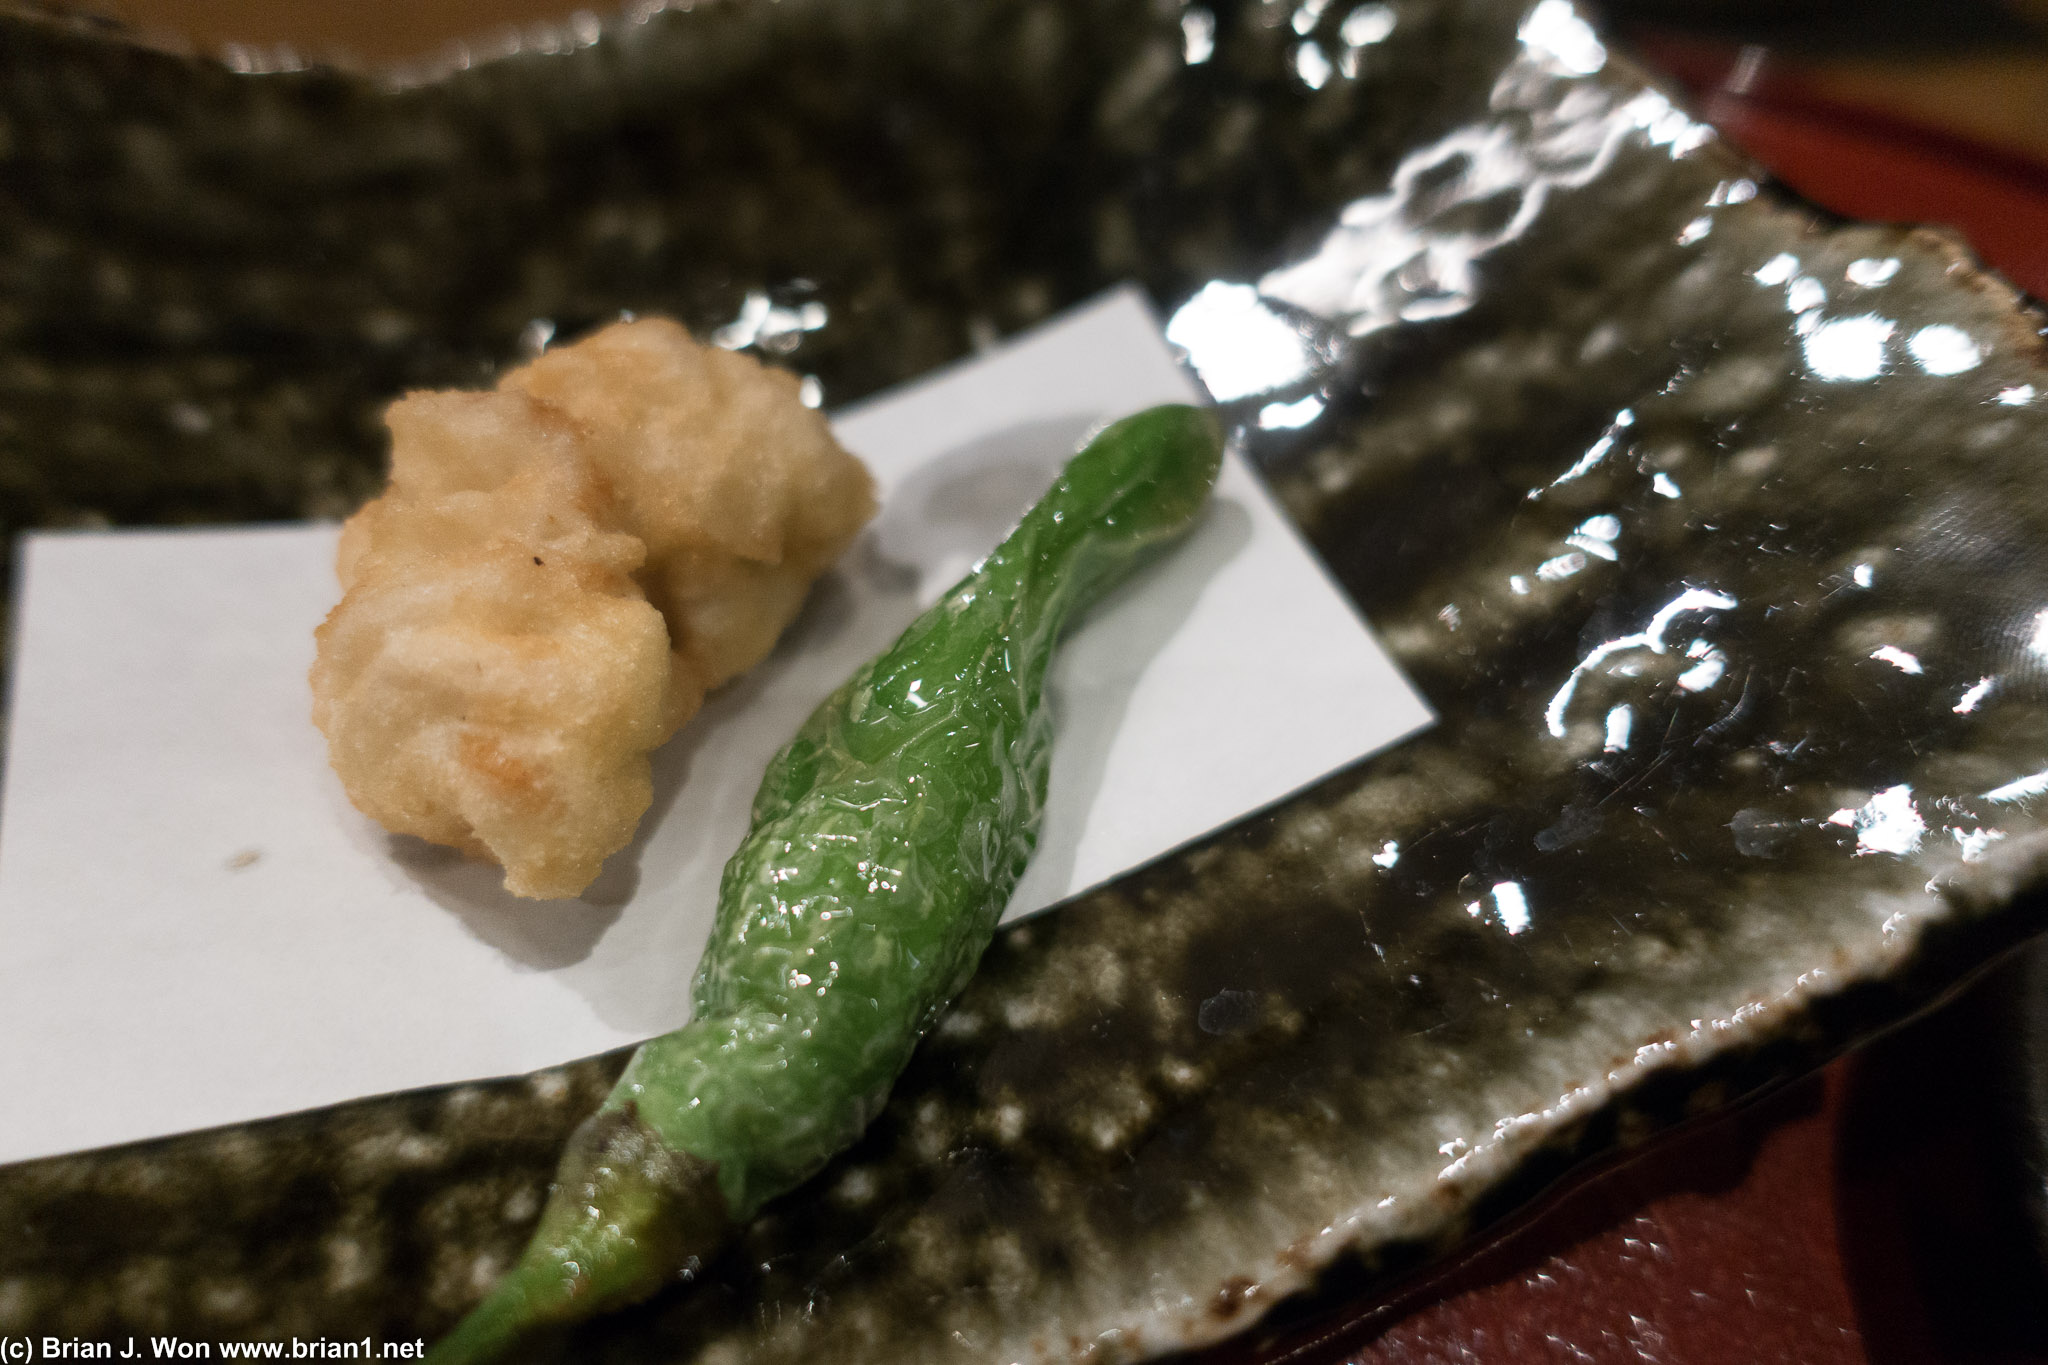 White fish tempura. Superb but clearly not their strength.